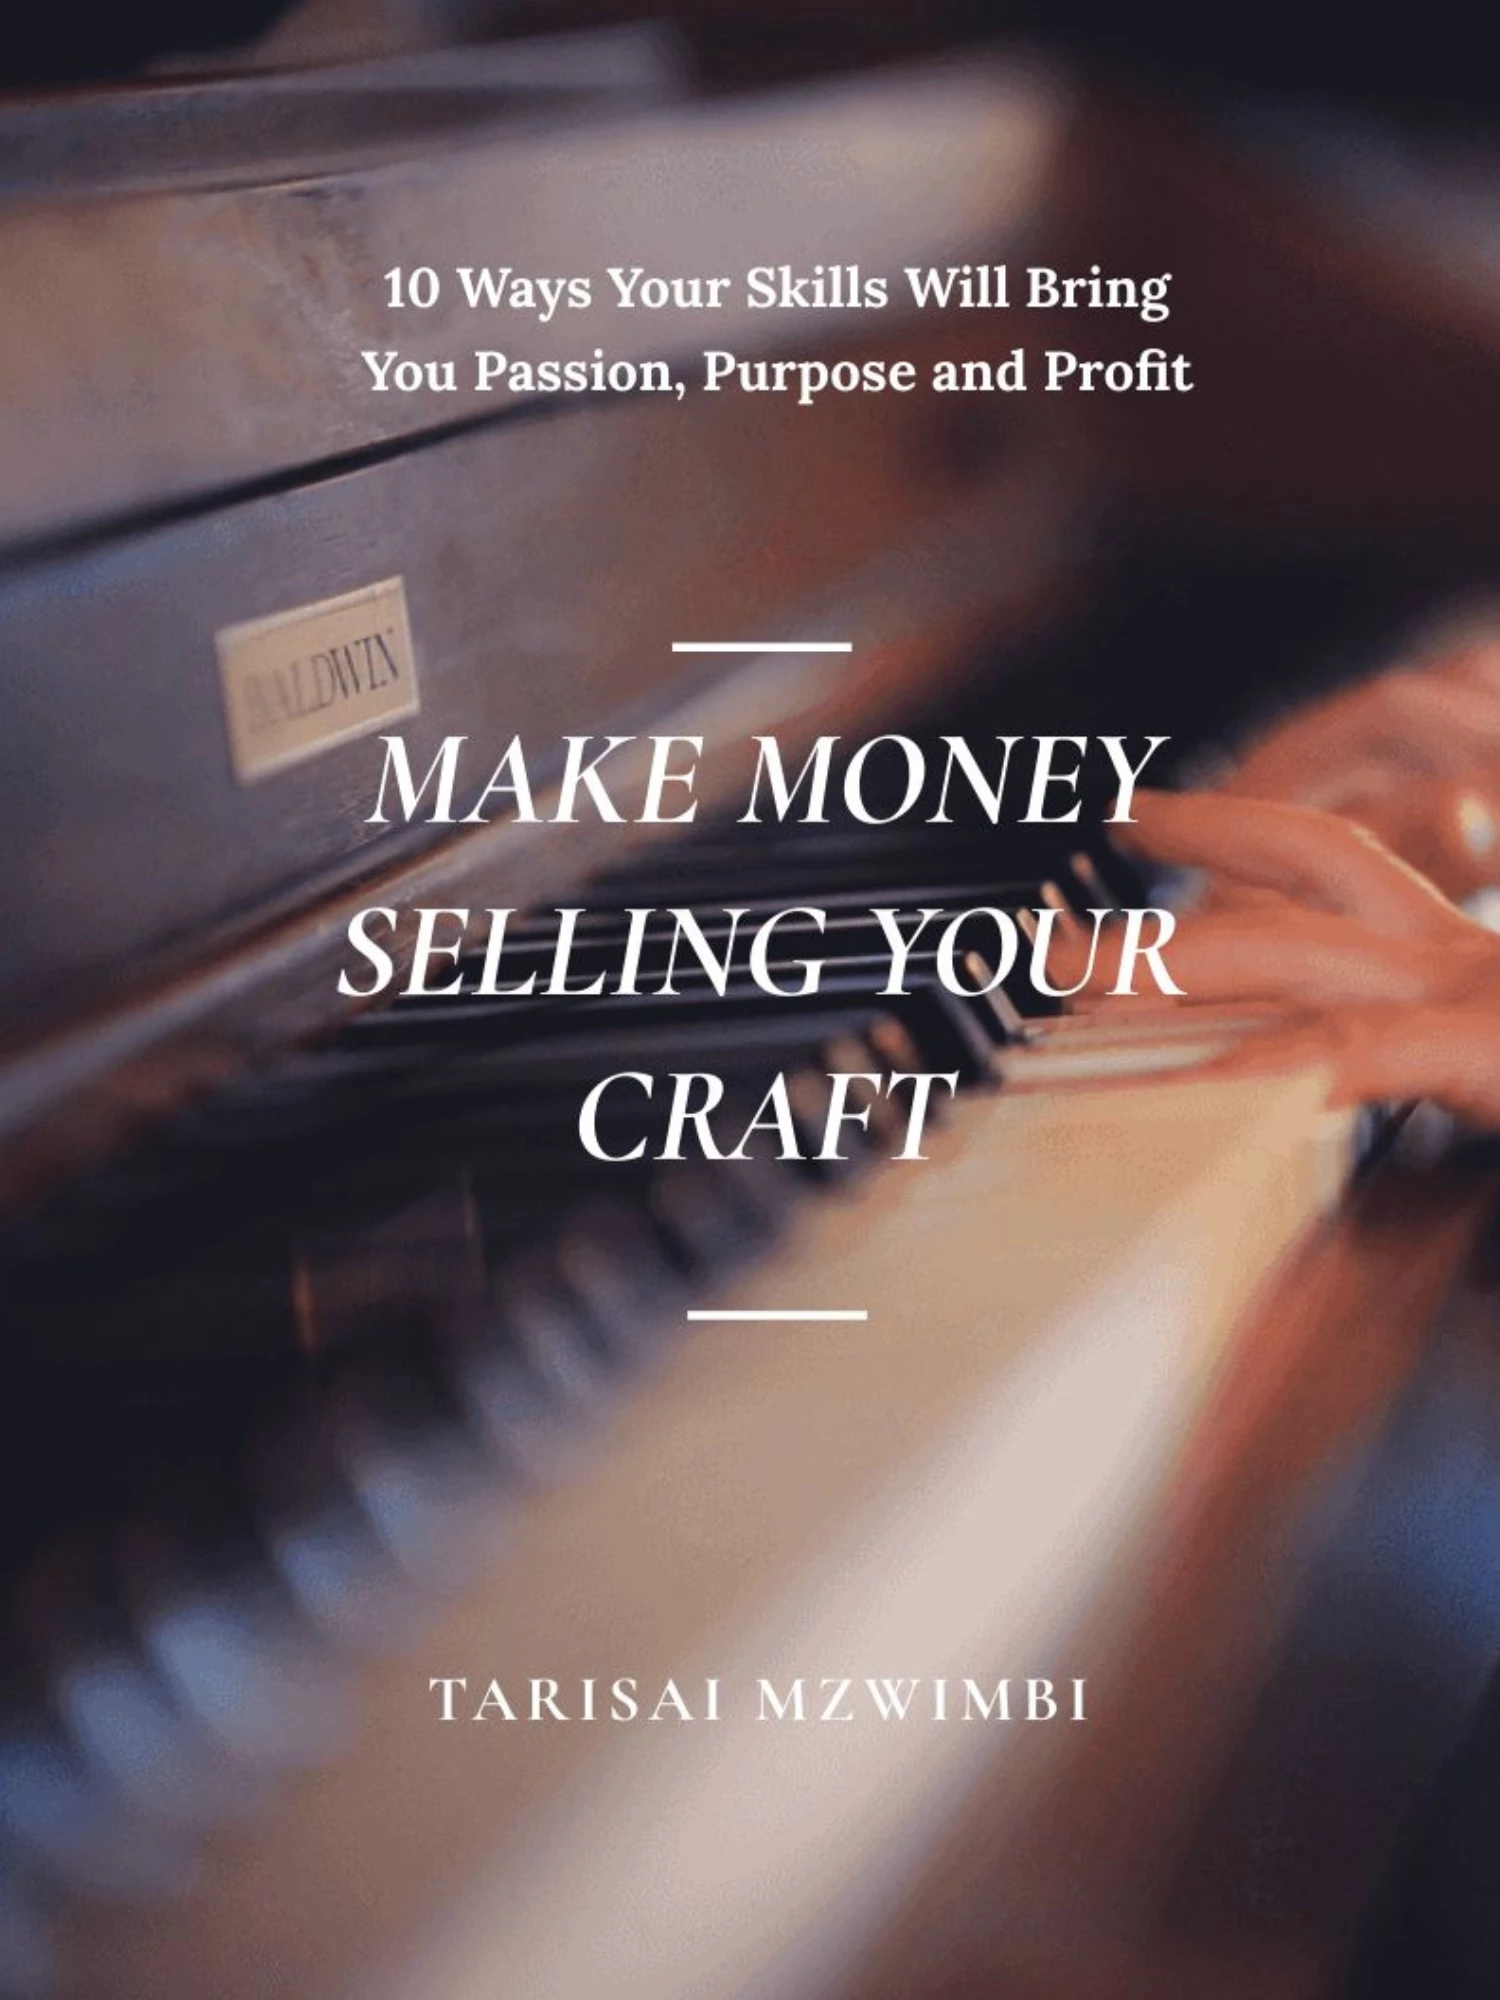 Make Money Selling Your Craft: 10 Ways Your Skills Will Bring You Passion, Purpose and Profit